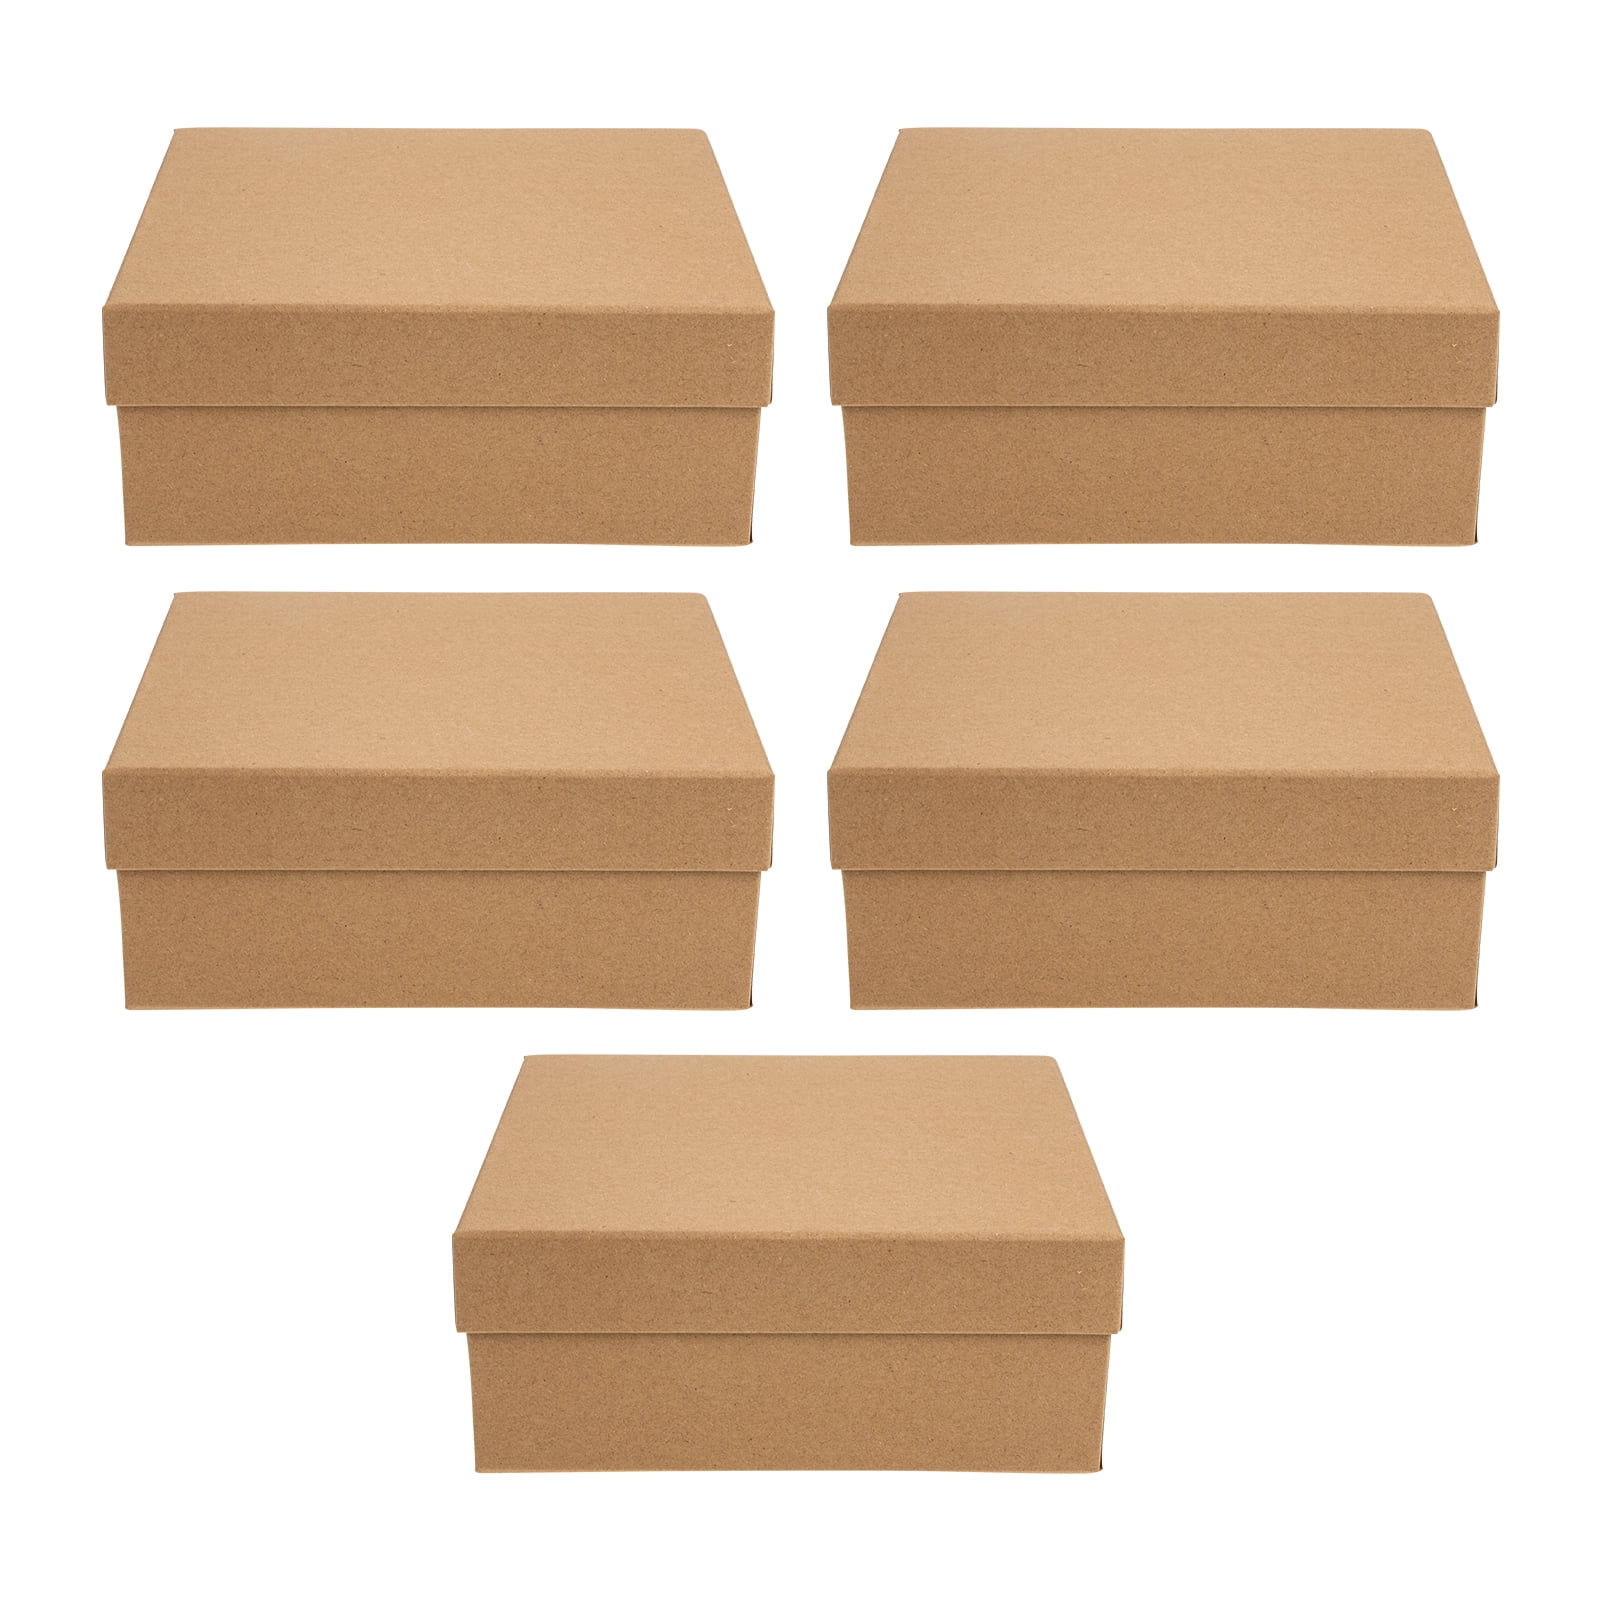 NIGNYA Small Brown Gift Boxes 2.16x2.16x0.98 inches, 100PCS Tiny Boxes for  Gifts Cardboard Mini Favor Boxes for Presents, Small Favor Box, Jewelry